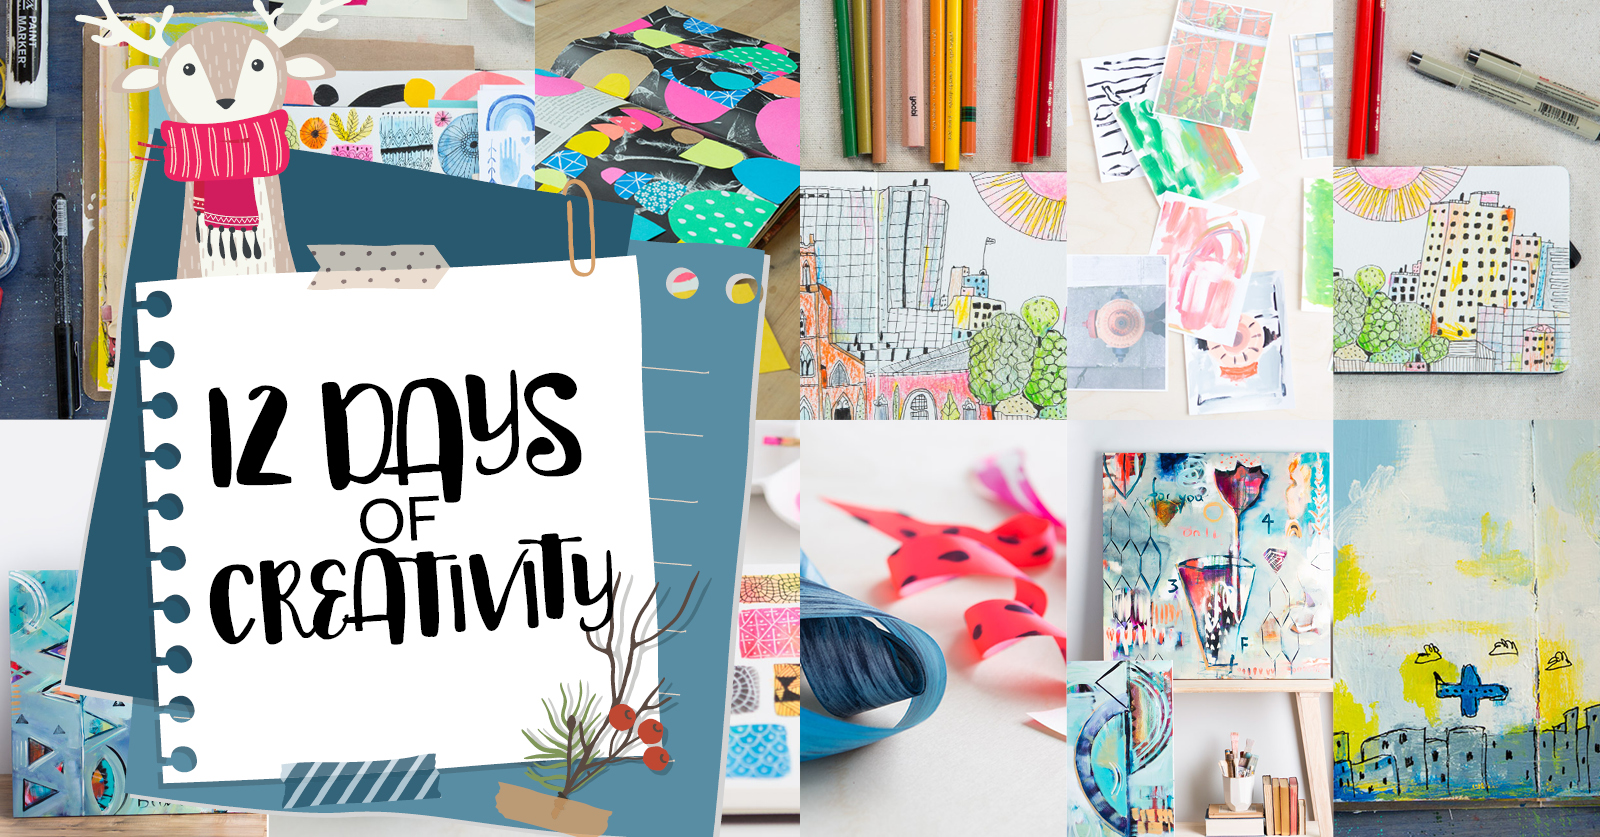 Collage artwork featuring a paper that reads "12 Days of Creativity"